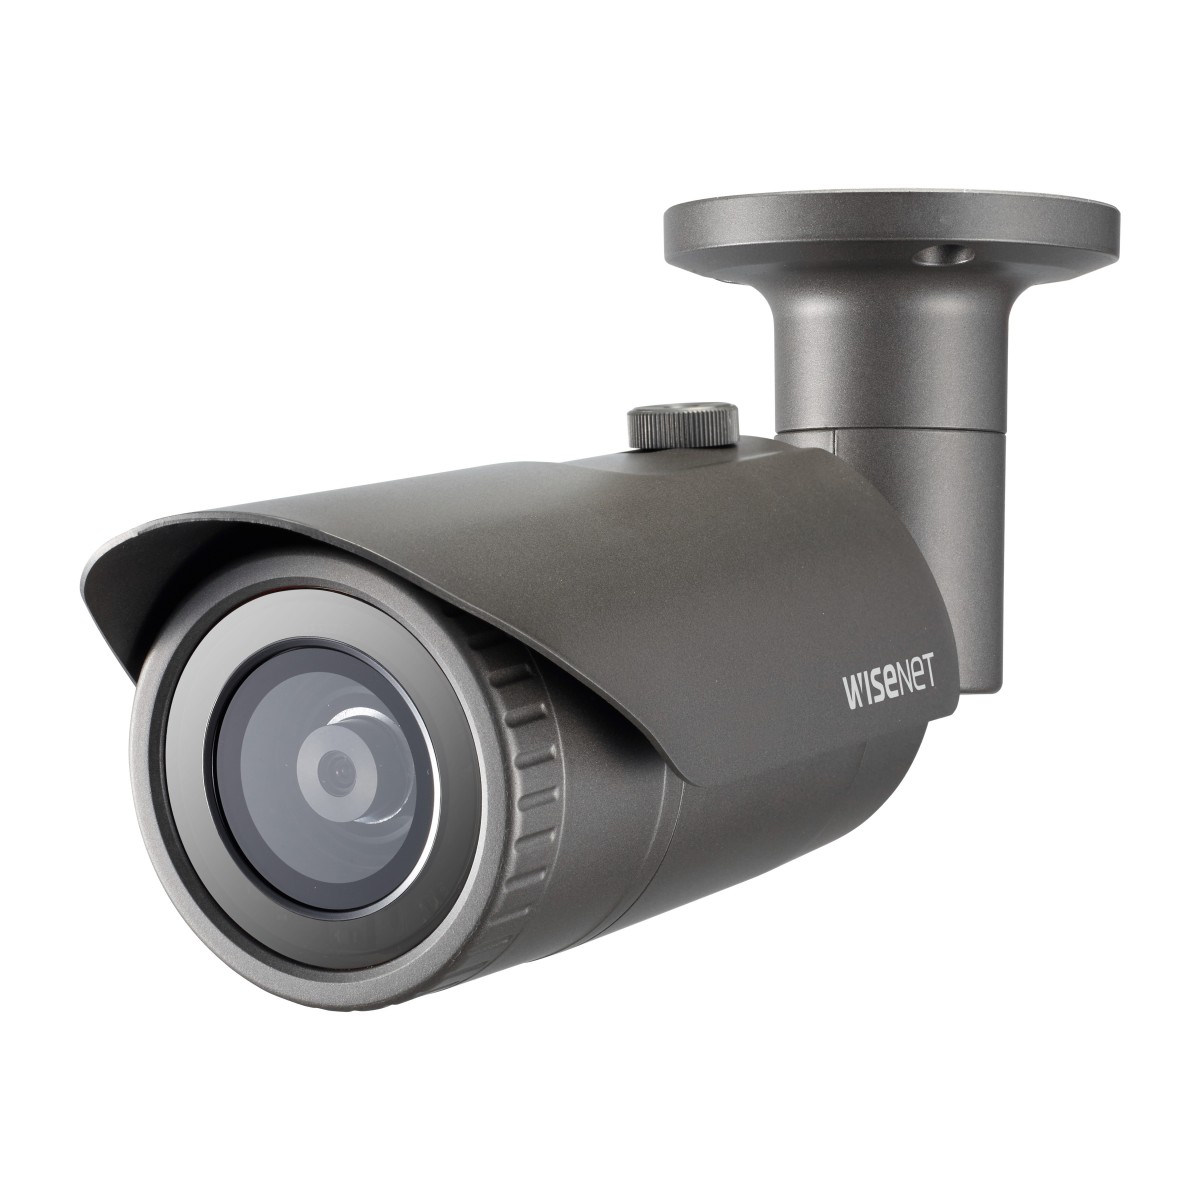 Hanwha Techwin Hanwha QNO-8020R - IP security camera - Outdoor - Wired - Bullet - Ceiling/Wall - Gray